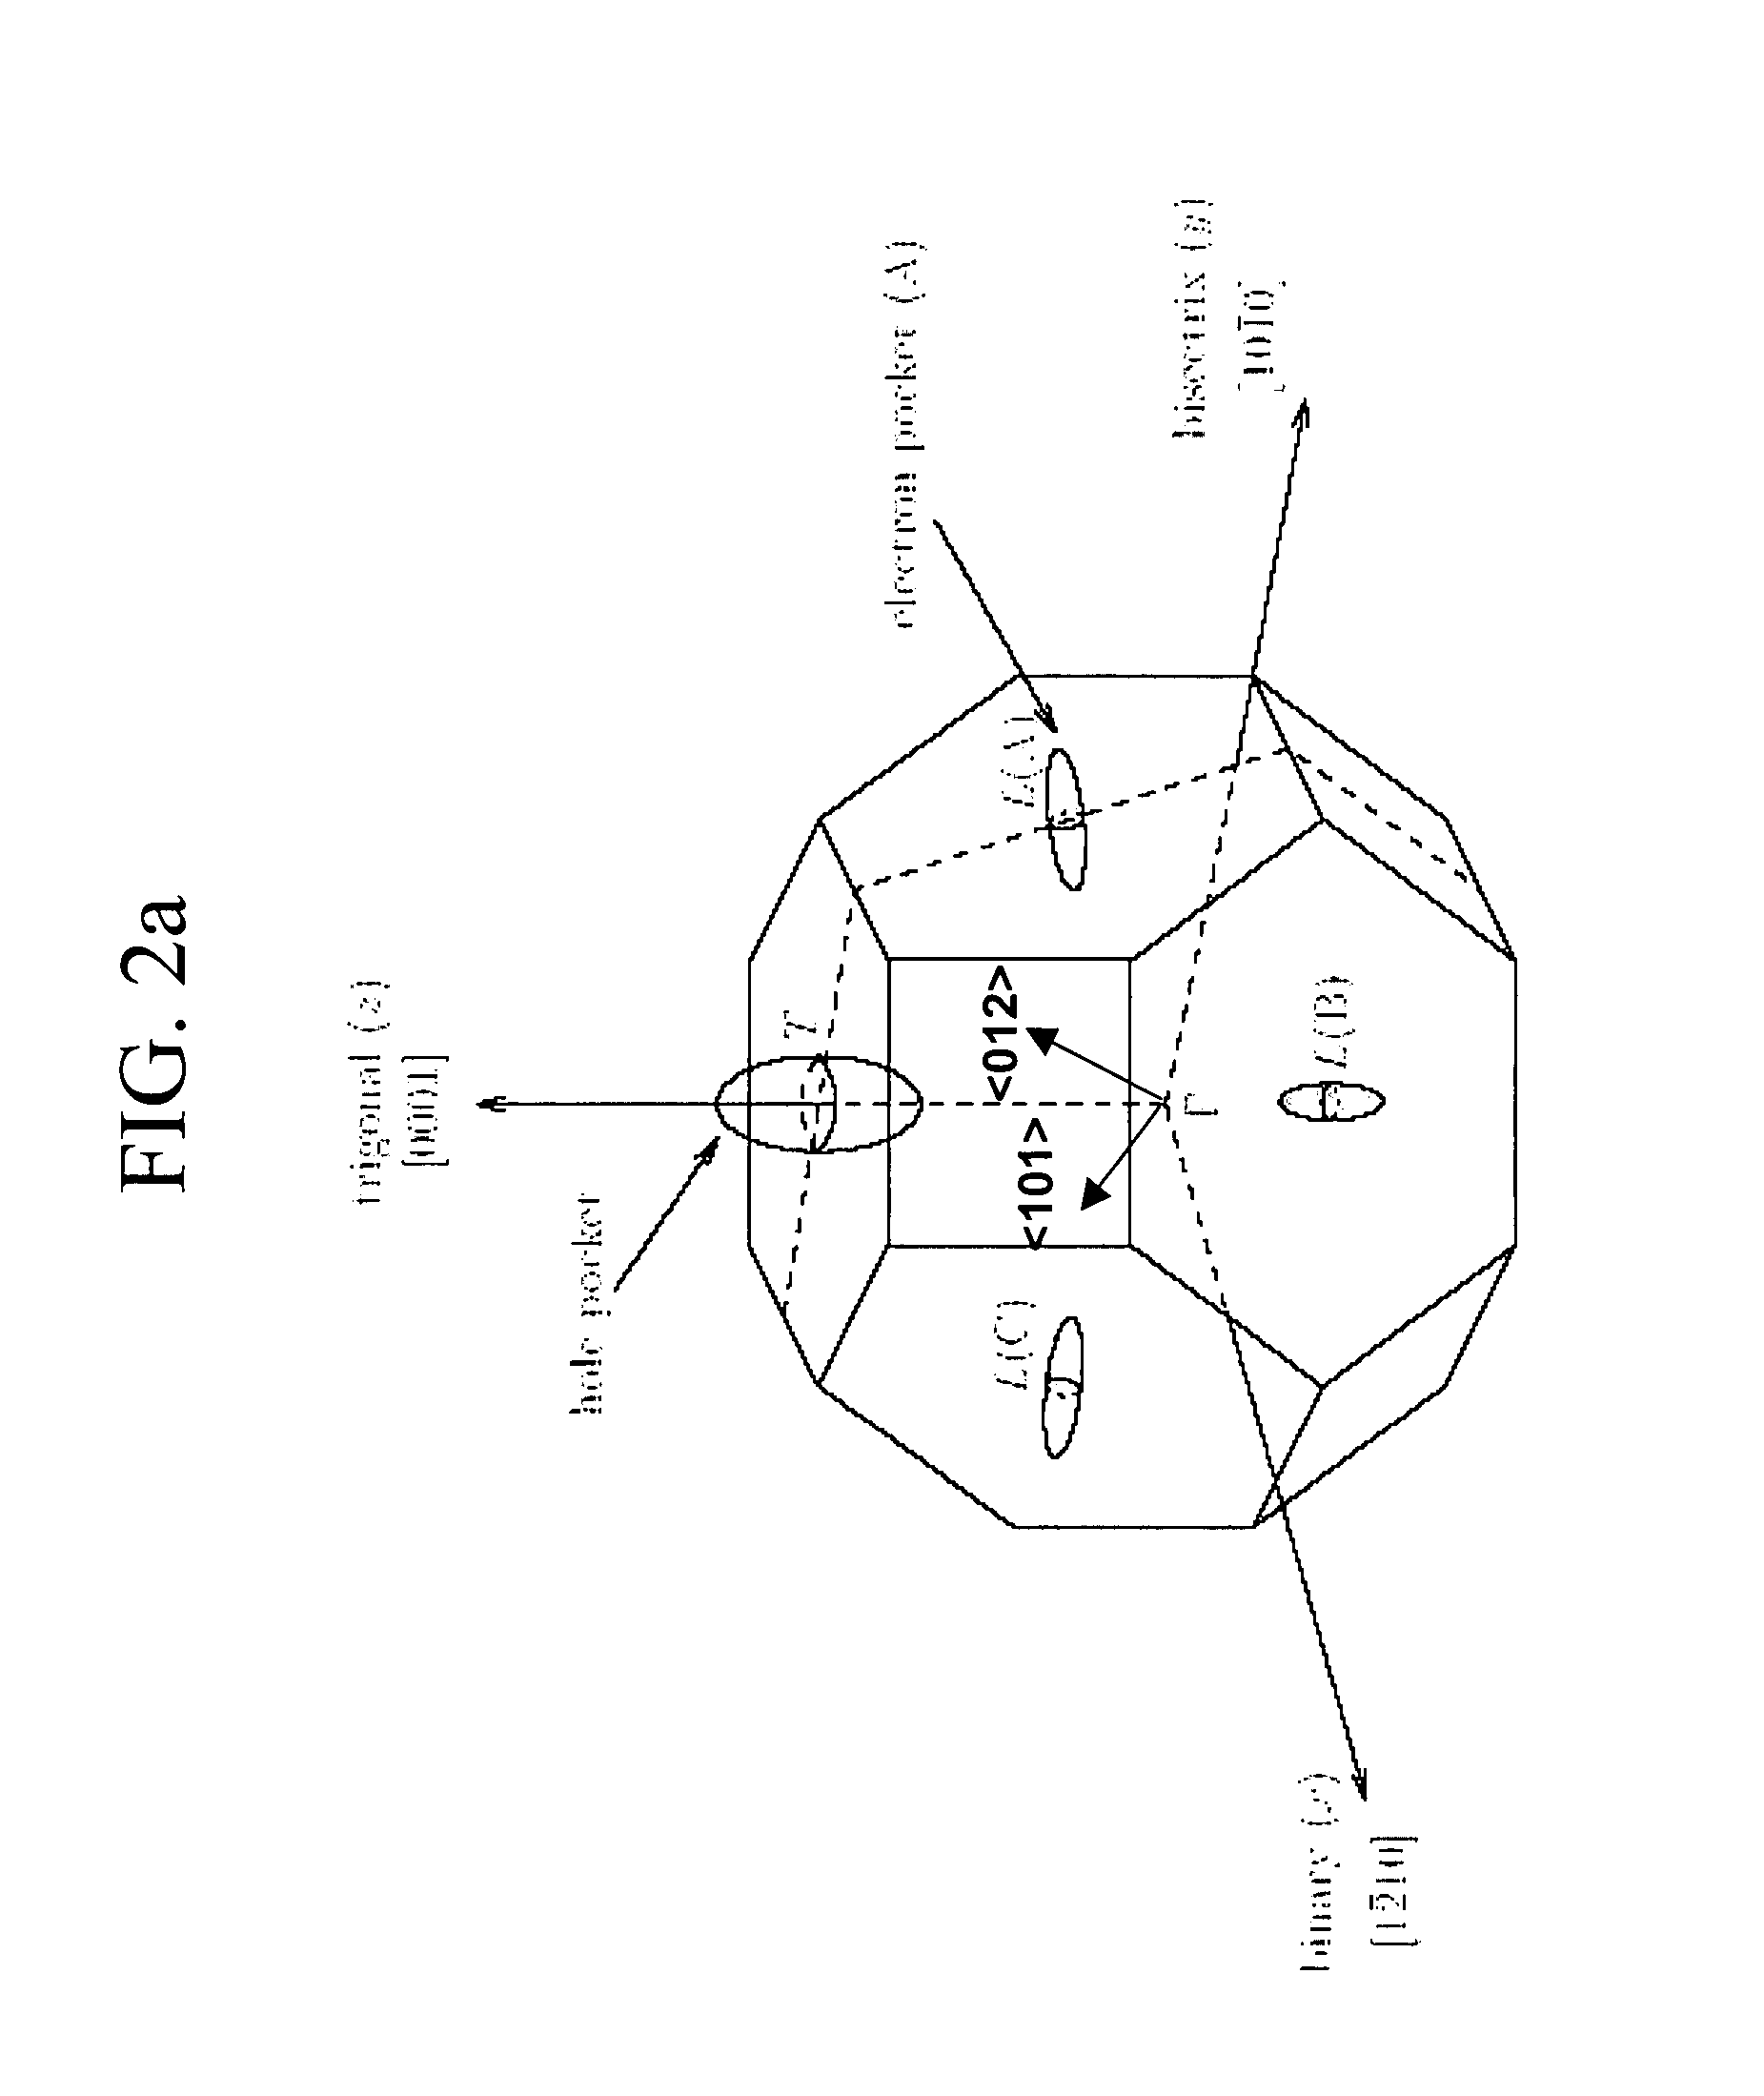 Optoelectronic devices utilizing materials having enhanced electronic transitions